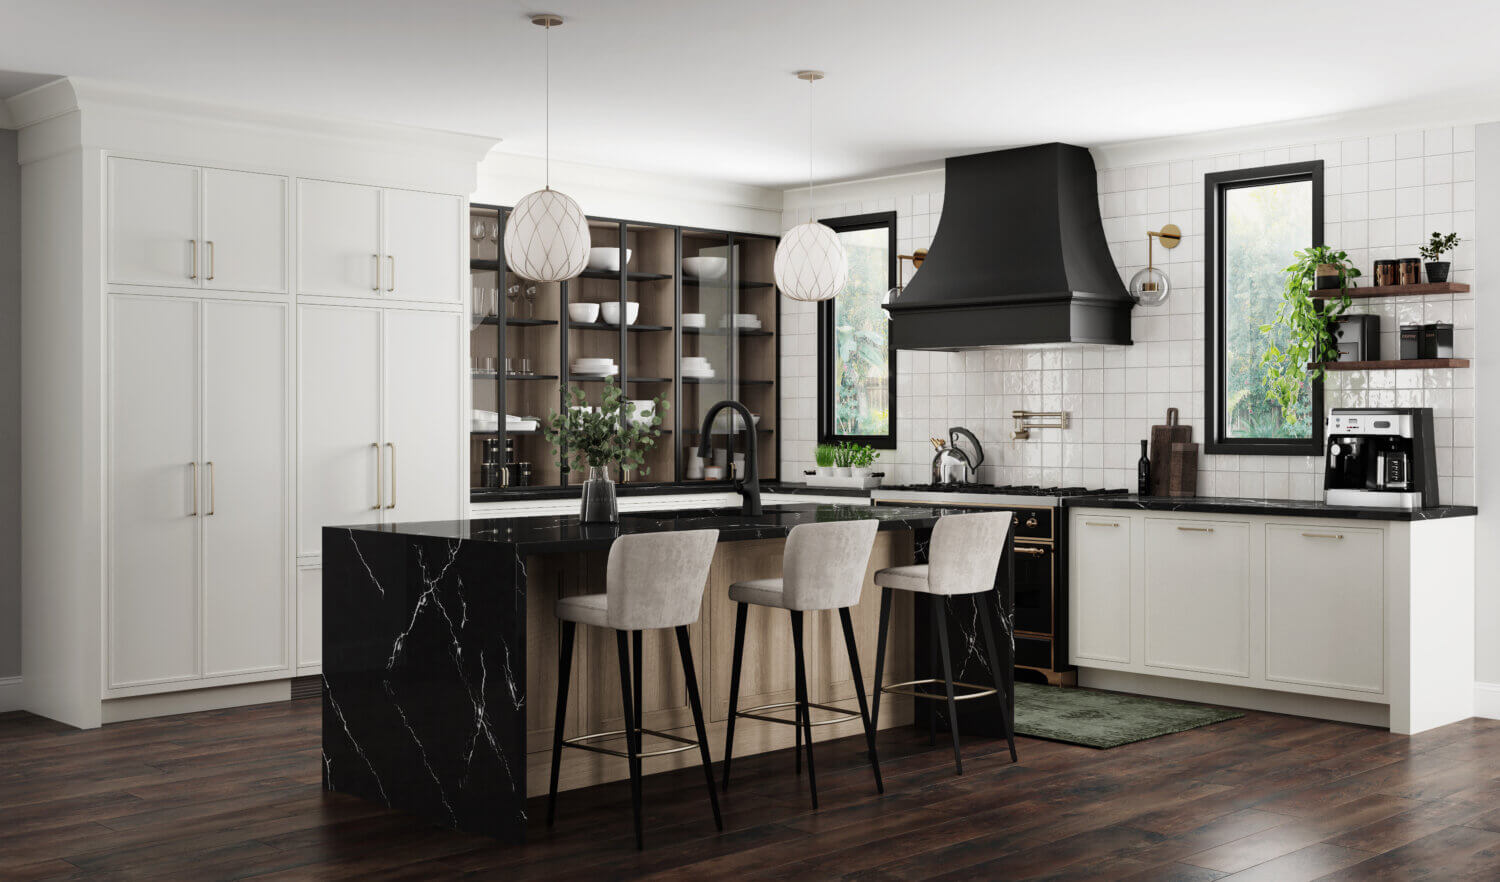 This alluring kitchen design features a skinny shaker door style with thin rails and stiles using inset cabinets. The cabinetry colors combine matte back metal glass cabinet doors, with an off-white paint, and a light stained white oak. A black painted curved hood creates a beautiful feature above the cooktop.